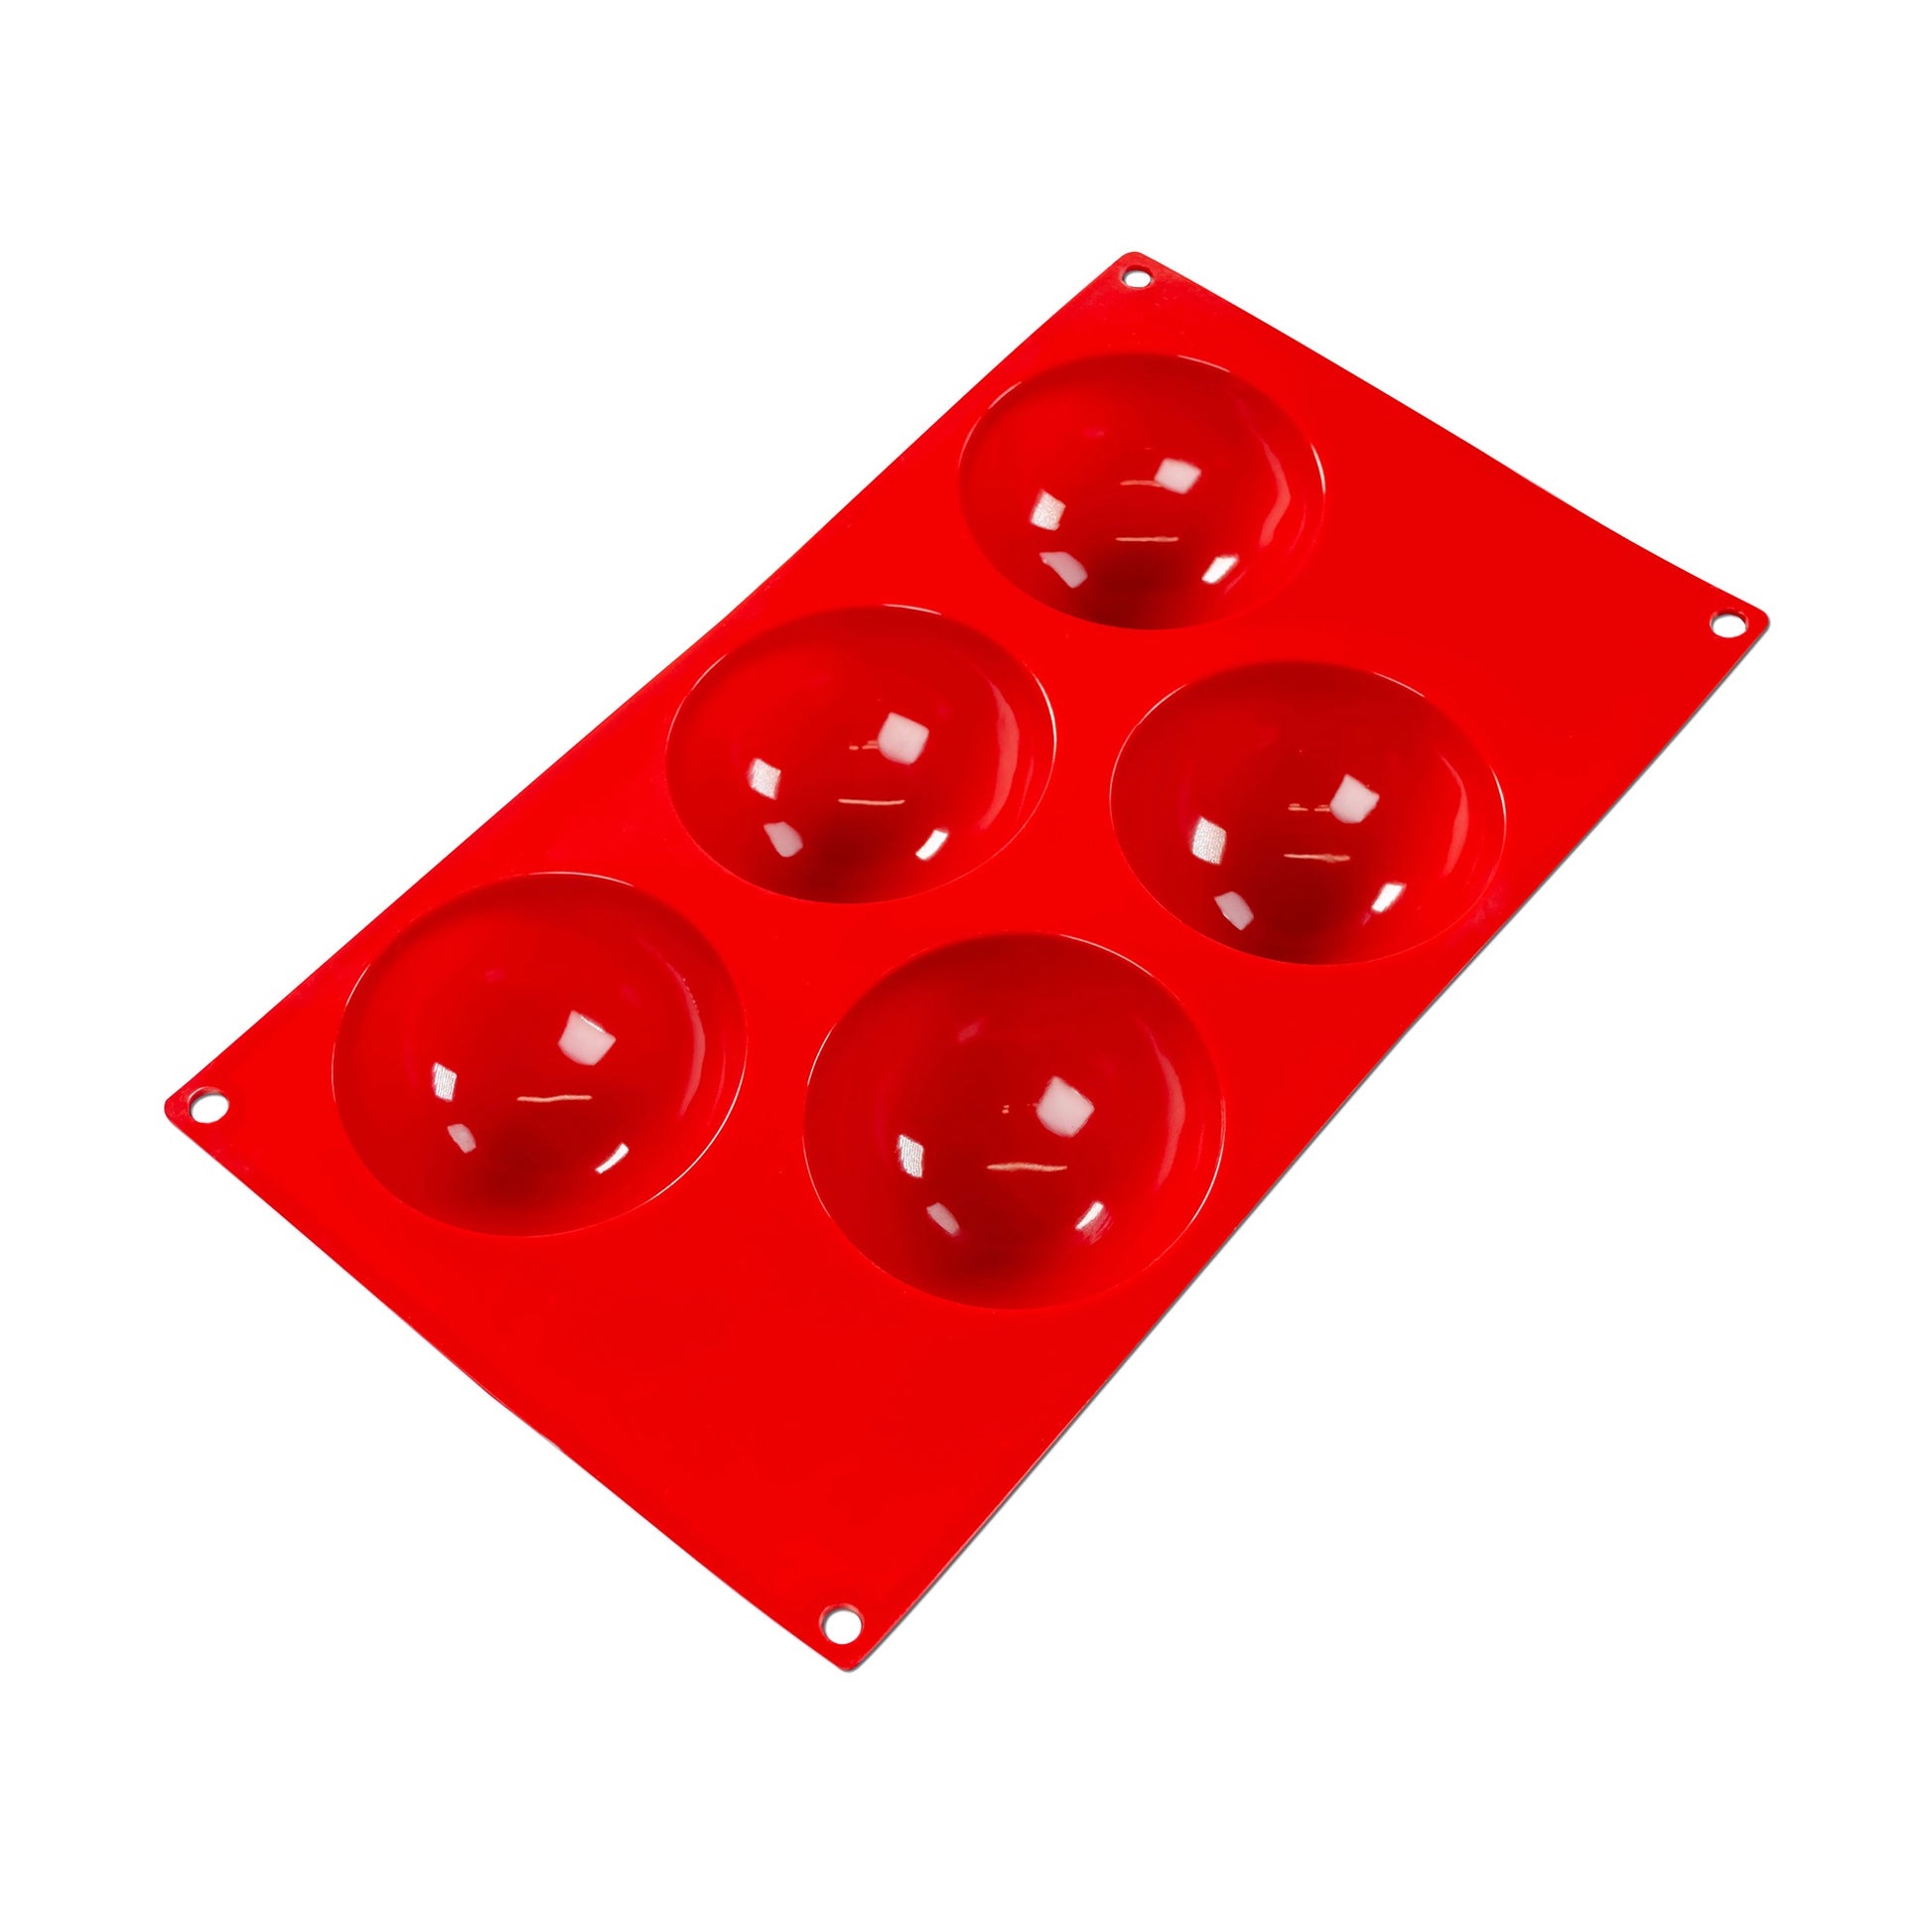 A bright red silicone mold designed for baking and candy-making, featuring five hemispherical cavities. The top view of the mold showcases the semi-circular shapes, suitable for creating dome-shaped desserts or chocolates. The cavities are evenly spaced out on the mold, and the glossy finish suggests a non-stick surface for easy removal of the treats.